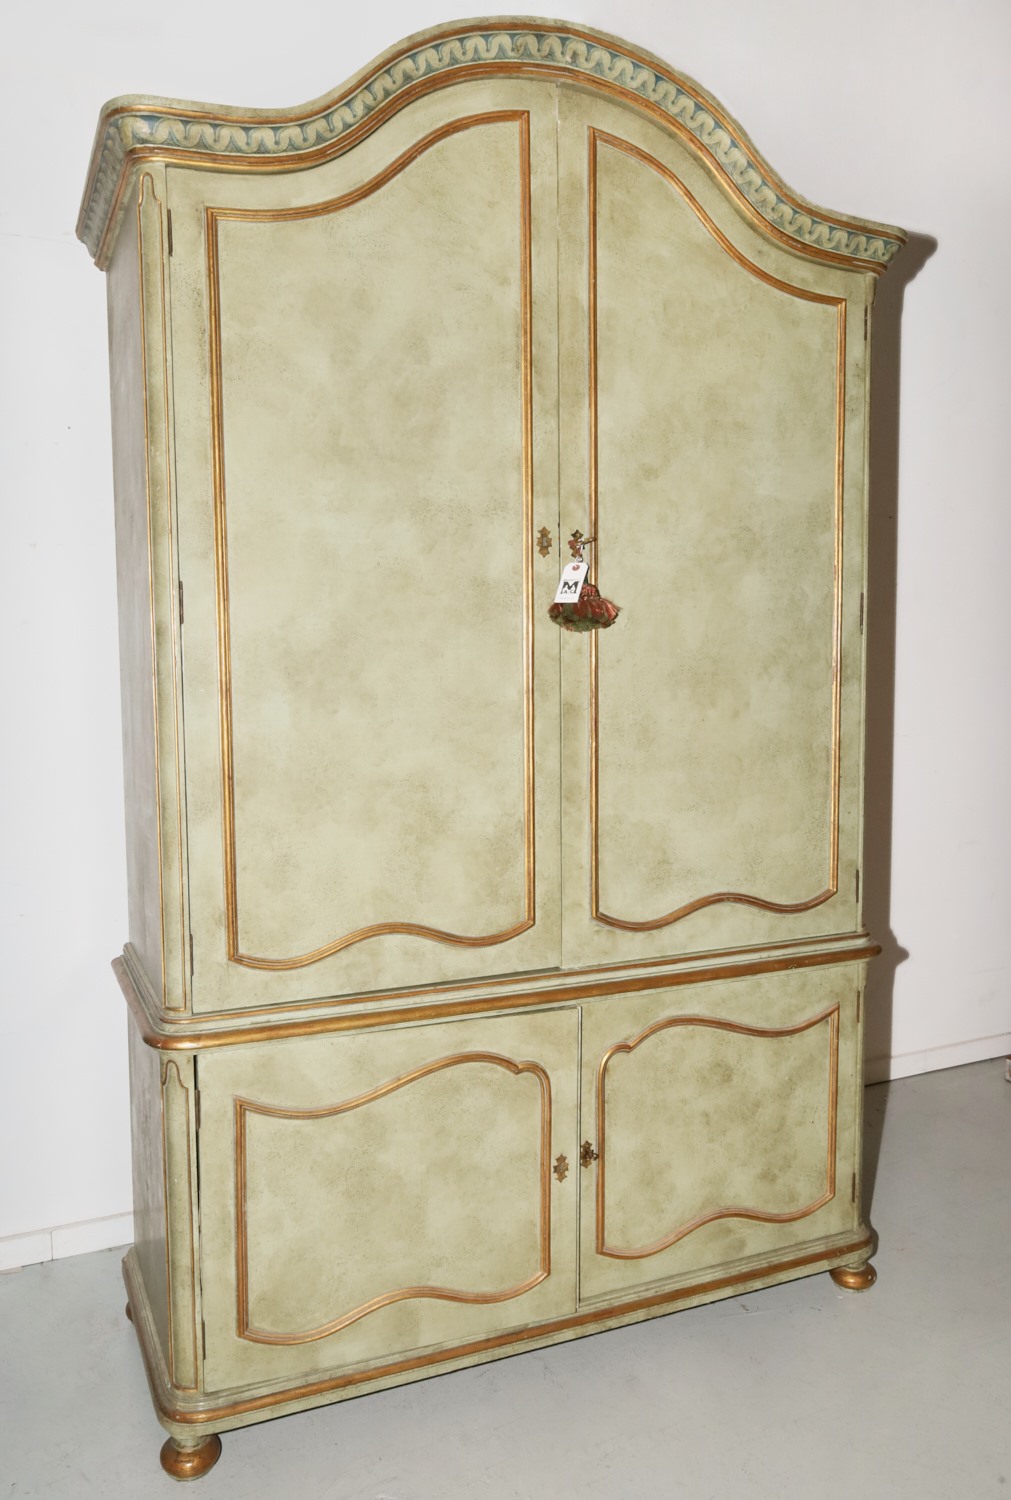 LARGE FAUX PAINTED FRENCH STYLE